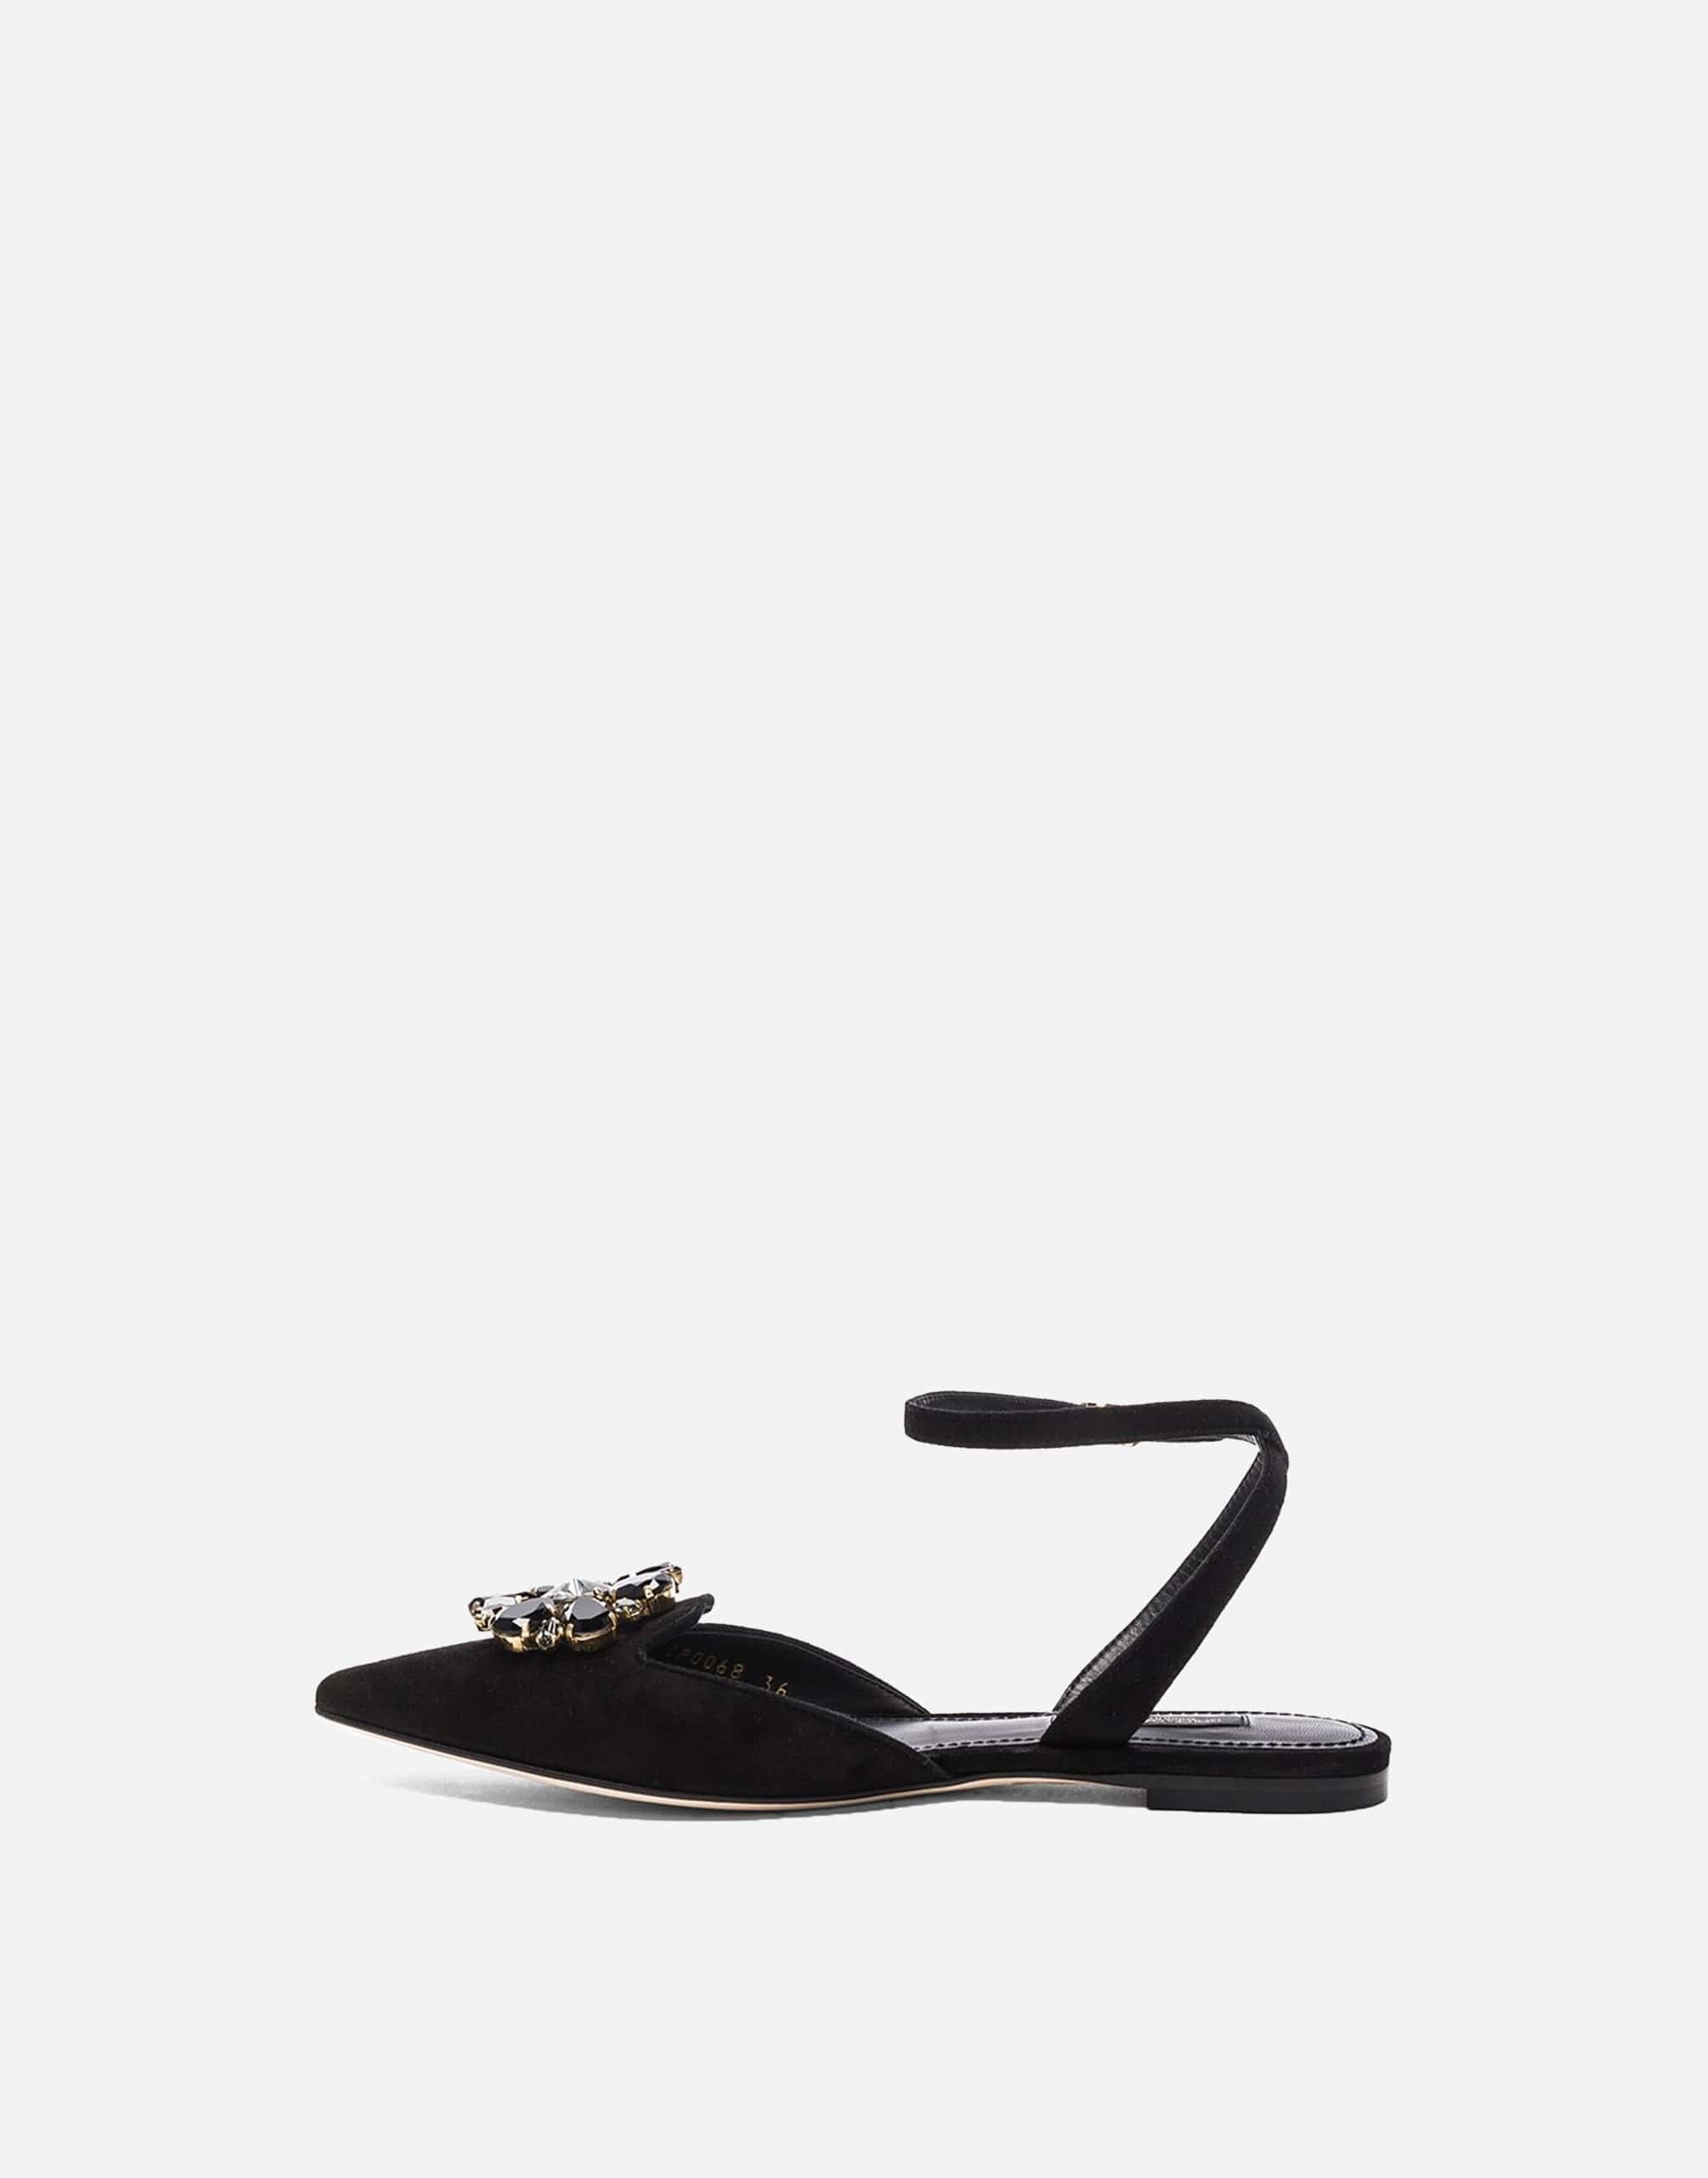 Dolce & Gabbana Flats With Ankle-Strap And Crystal Embellishments